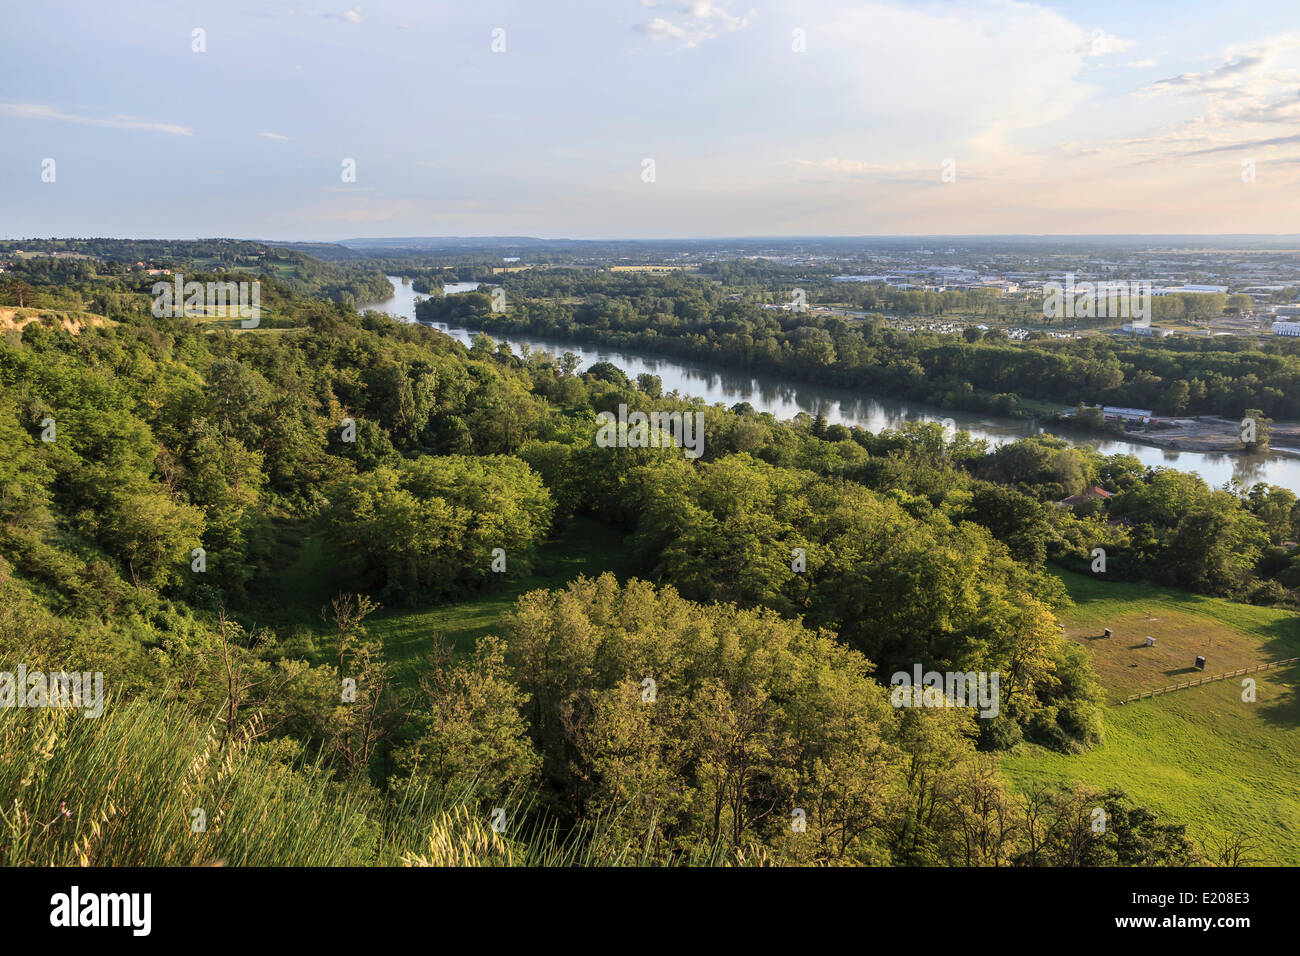 View of the Garonne River from the Pech-David hill in the evening light, Toulouse, France Stock Photo